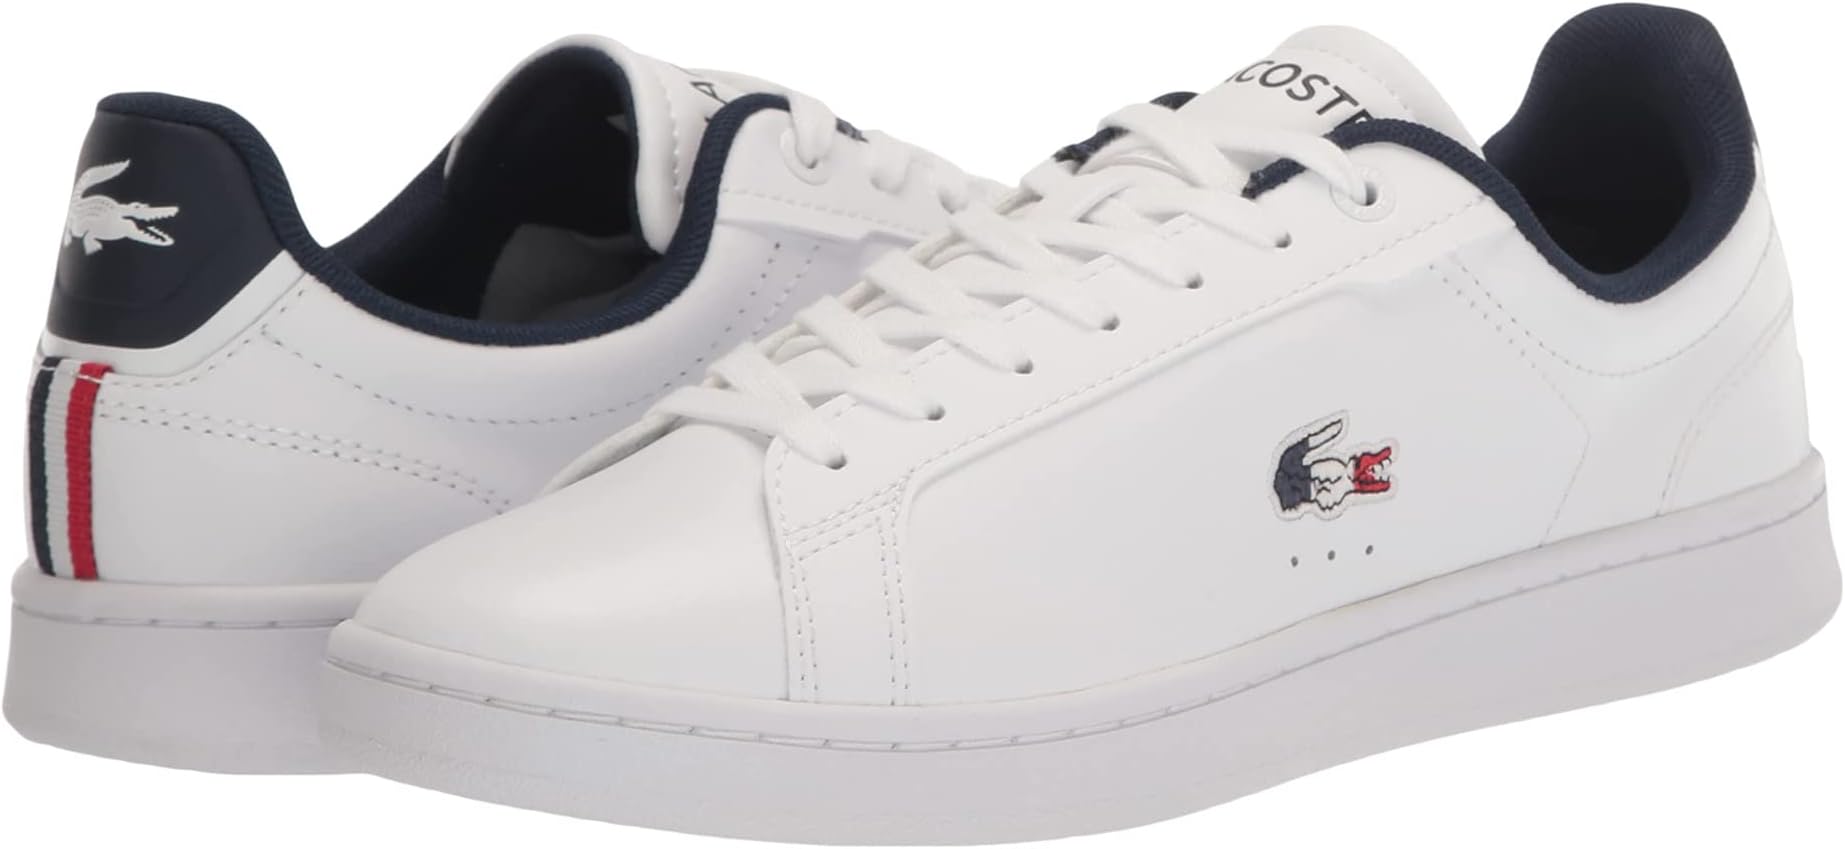 Кроссовки Carnaby Pro Tri 123 1 Lacoste, цвет White/Navy/Red